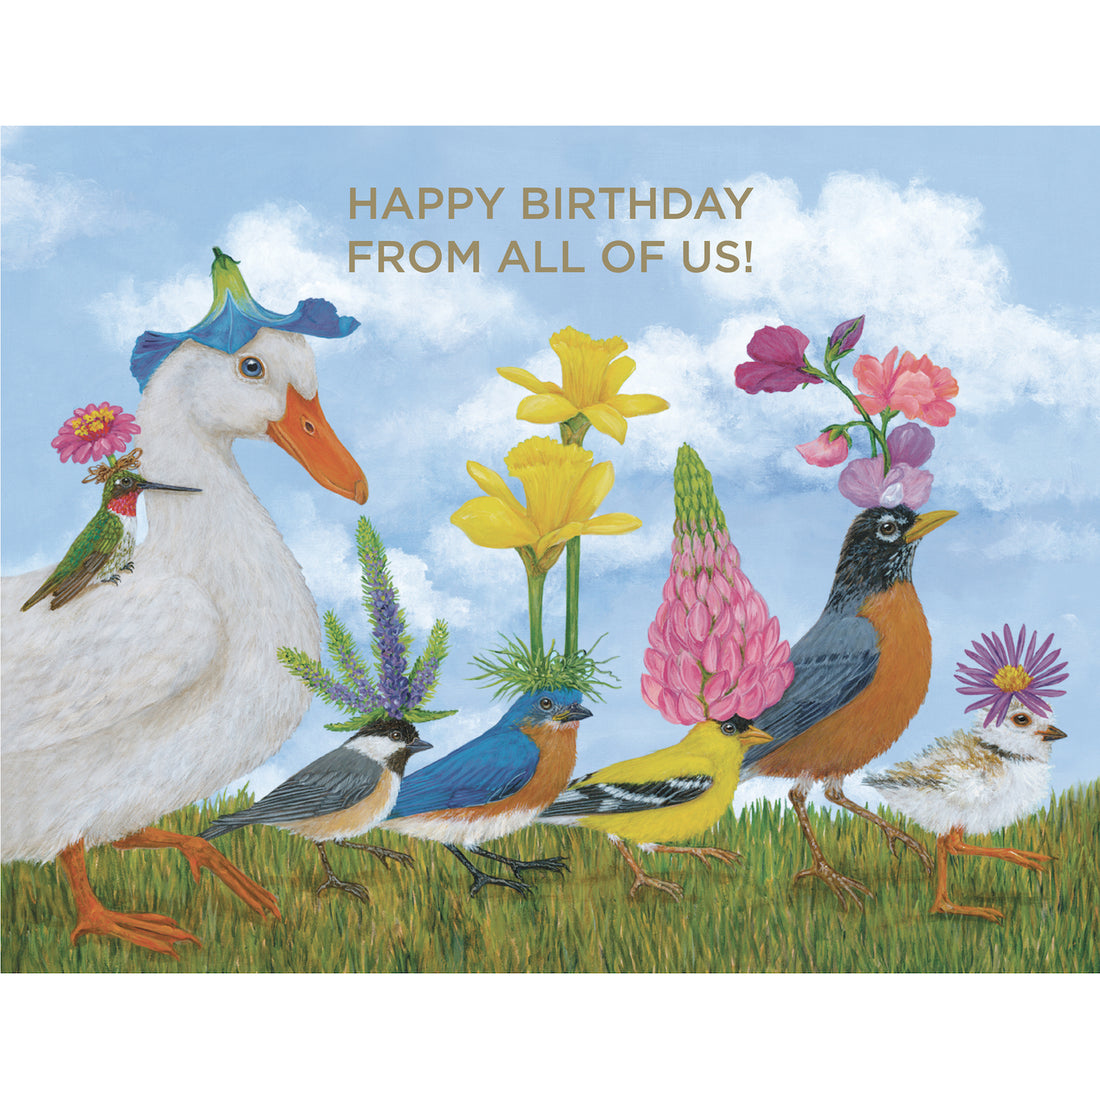 Happy birthday from all of us Hester &amp; Cook artist greeting card with natural world paintings.